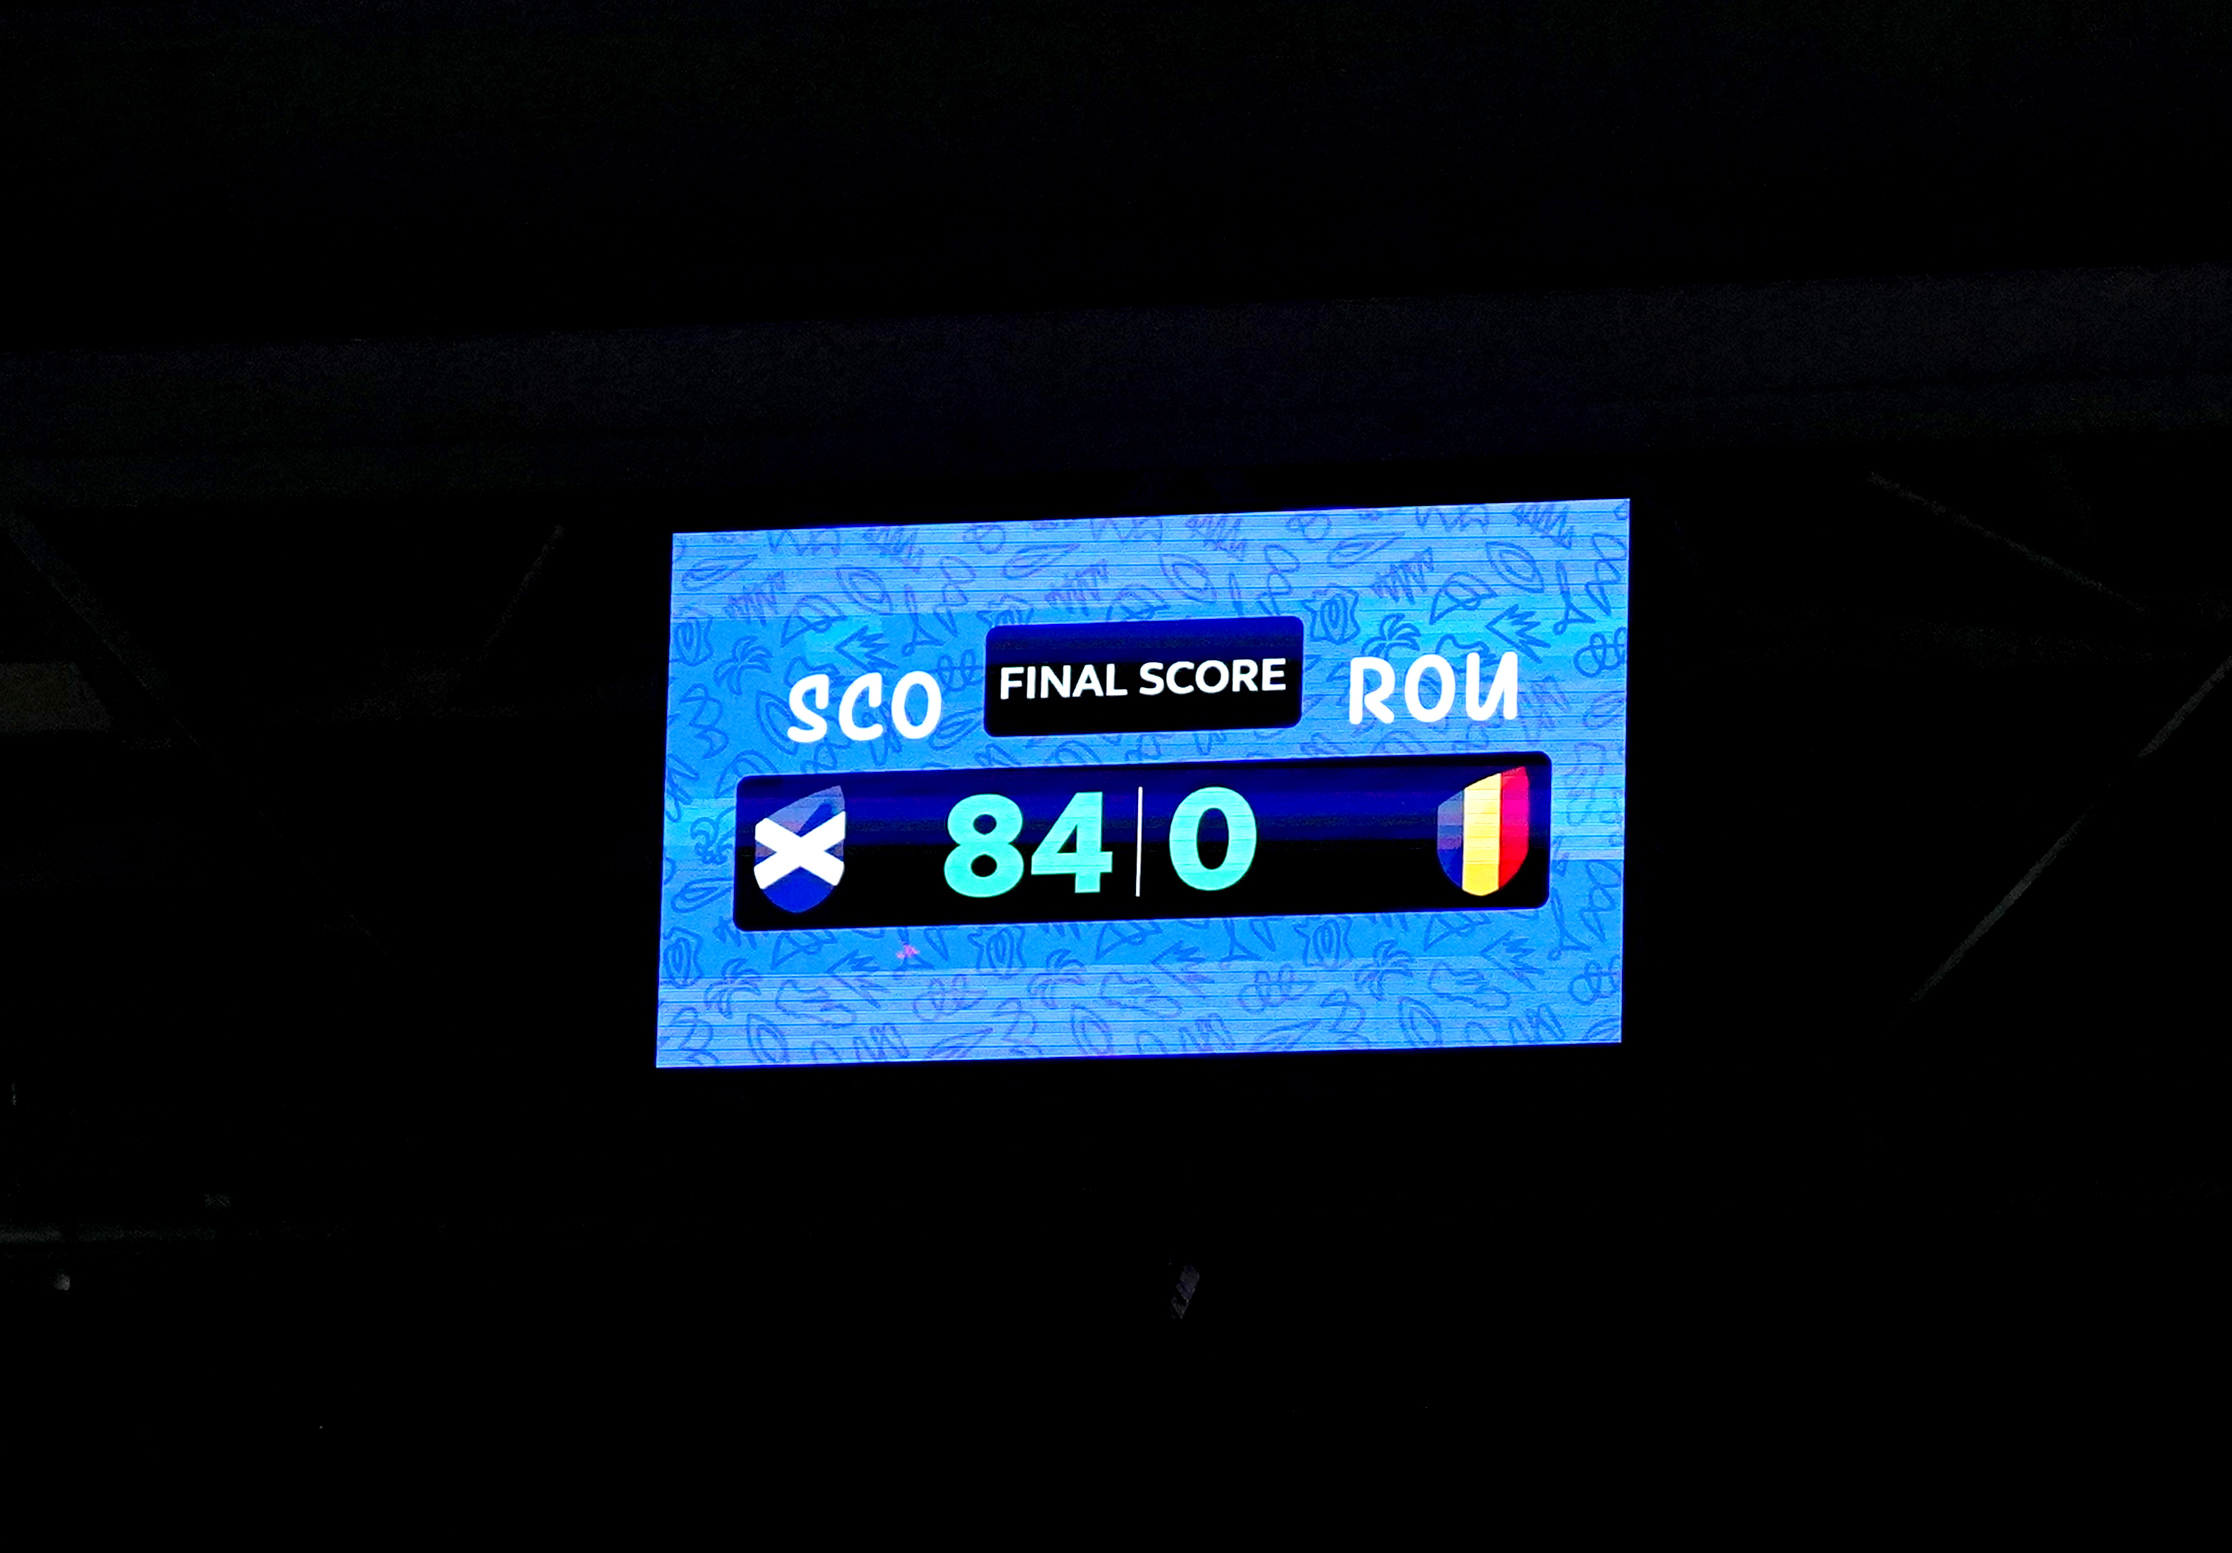 The final score is displayed on screen after Scotland's 84-0 win over Romania